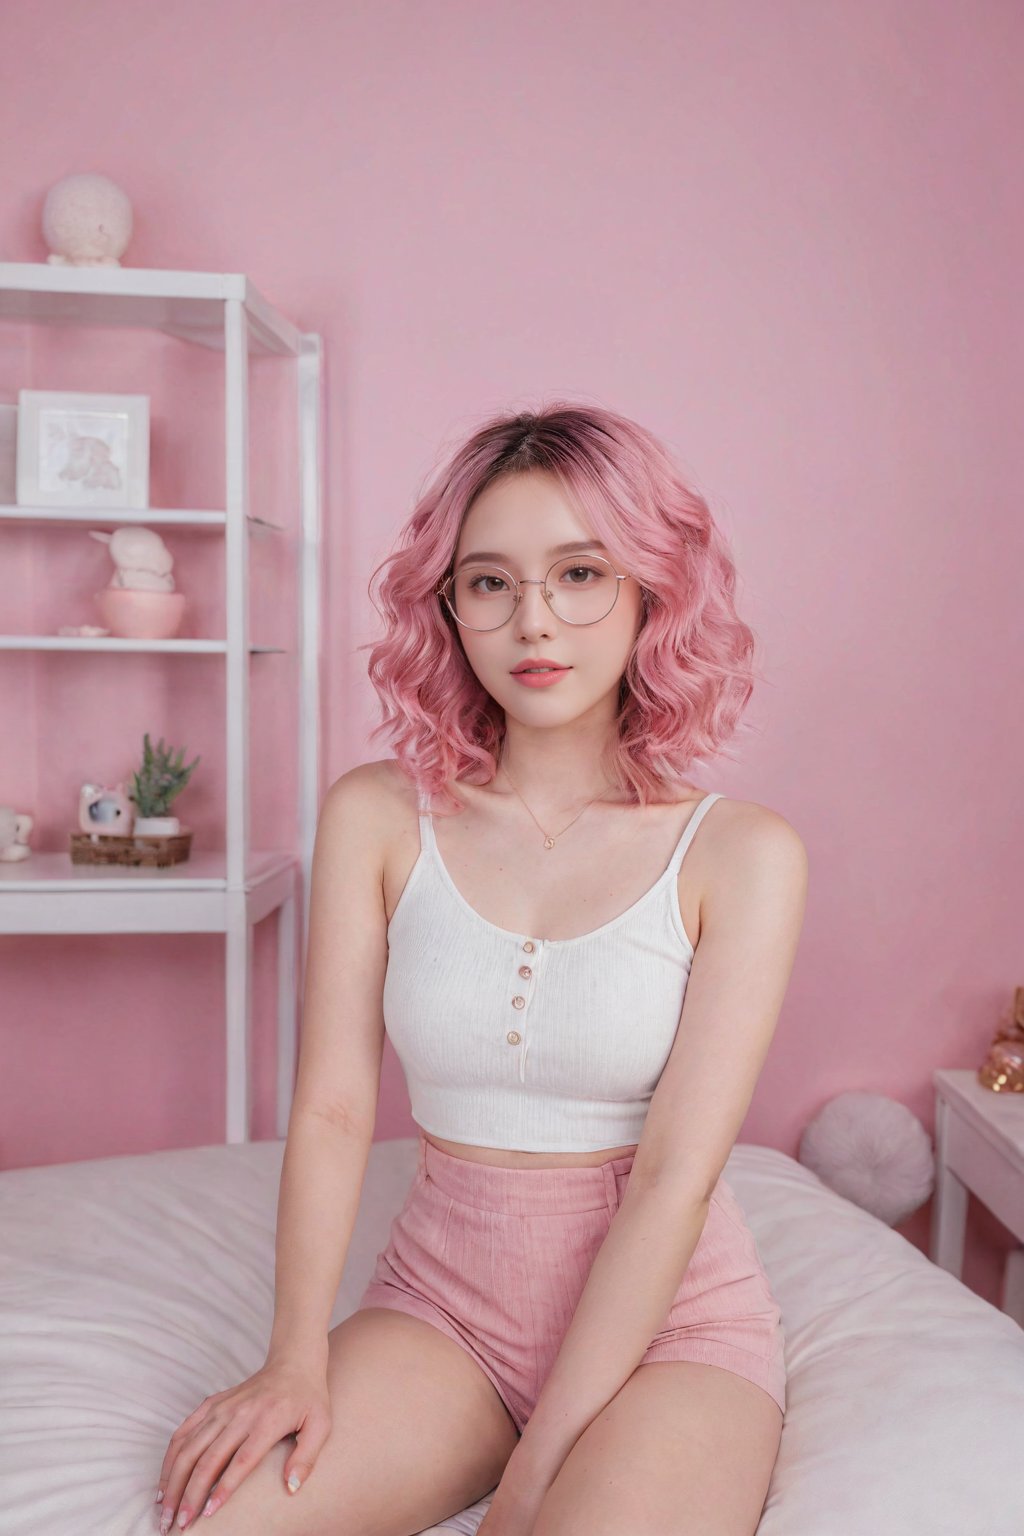 (masterpiece, cinematic, dynamic light & pose, ethereal quality, vibrant lighting, neon illuminated, colorful), More Reasonable Details, hubggirl, BREAK, A cheerful girl in a pink-themed outfit, surrounded by a pastel pink room filled with cute decorations, her pink hair styled in short curls, round glasses